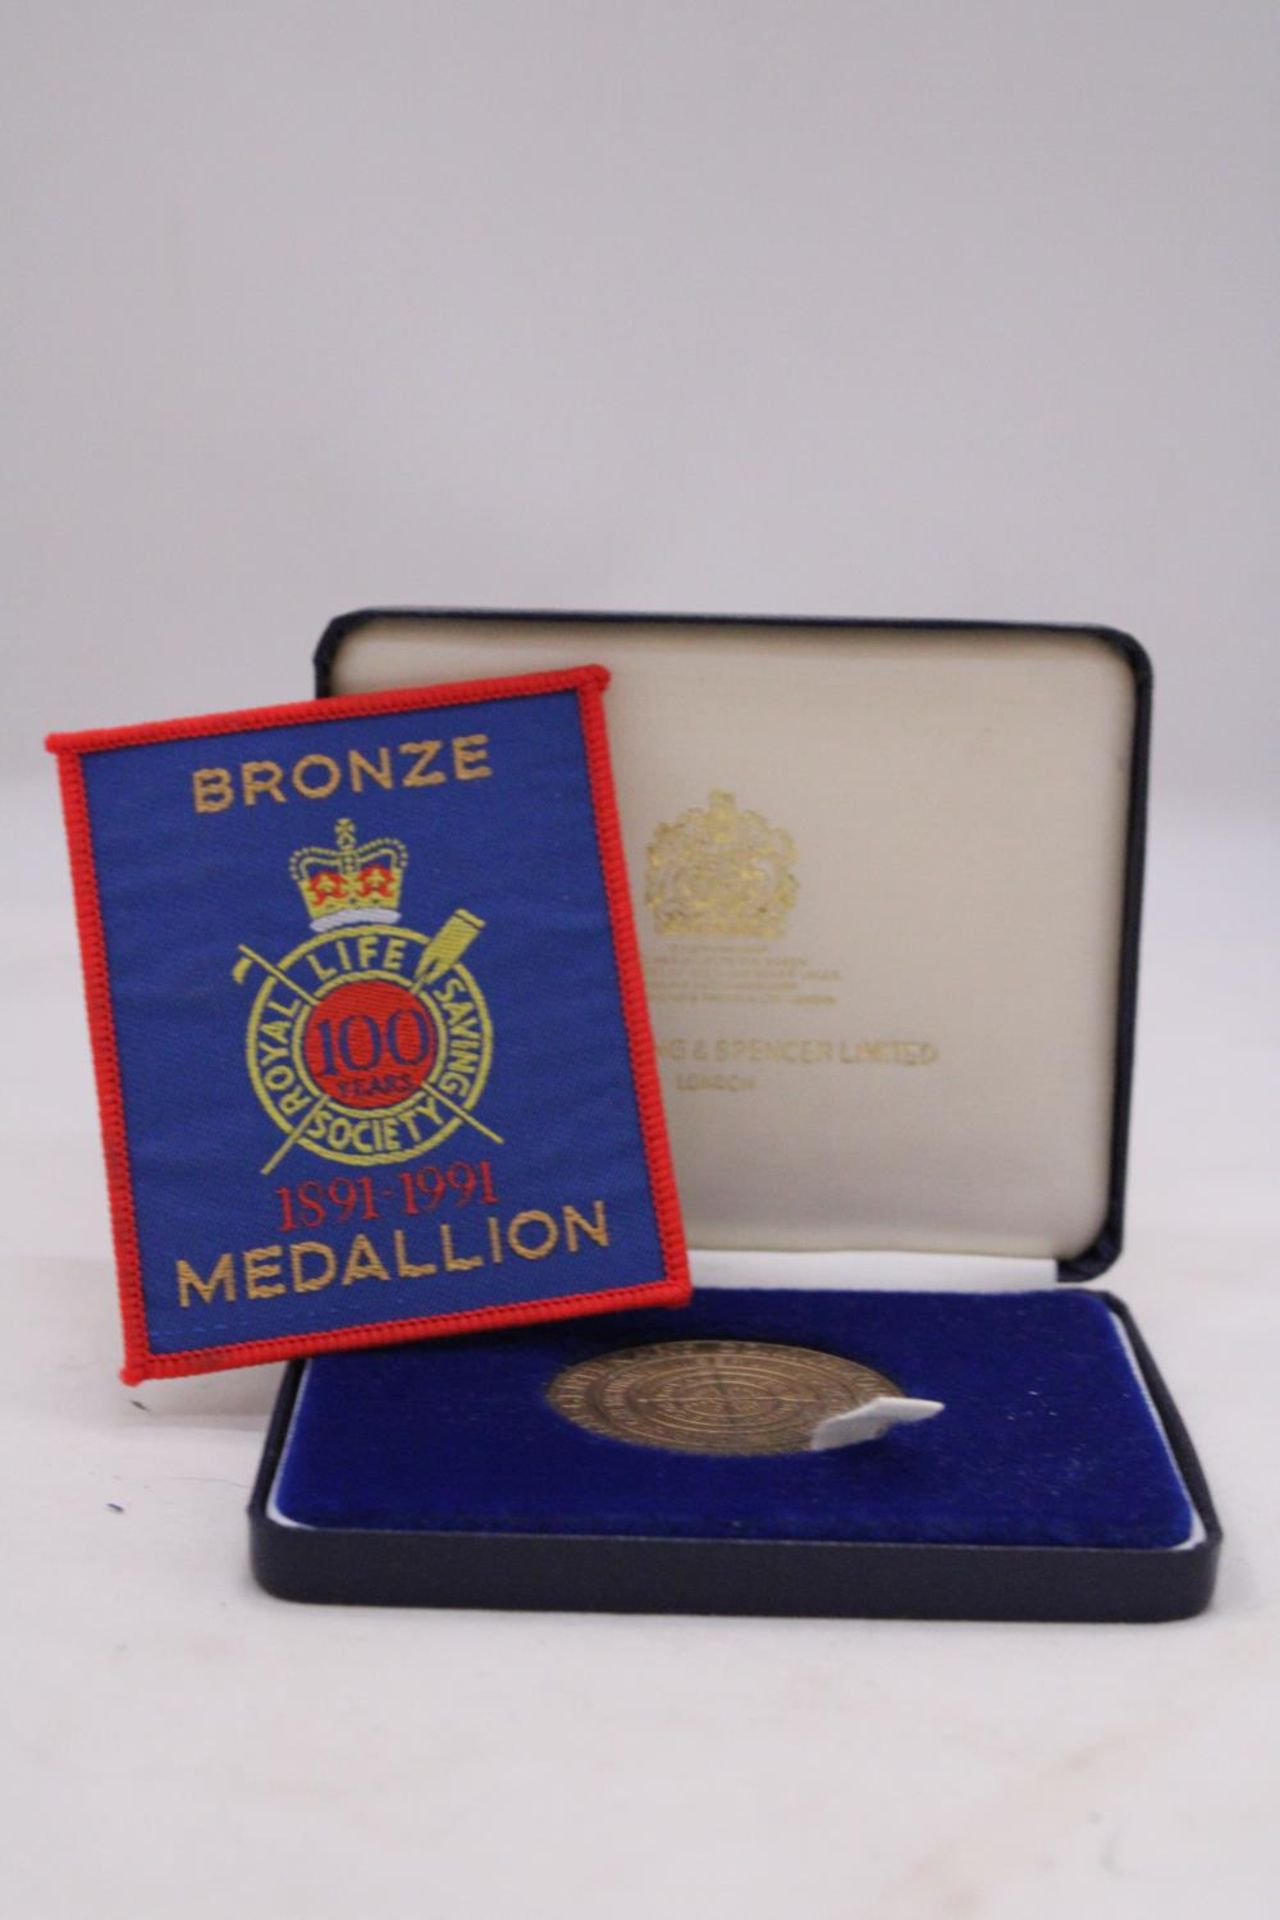 A BOXED BRONZE MEDAL AND ACCOMPANYING PATCH - Image 2 of 4